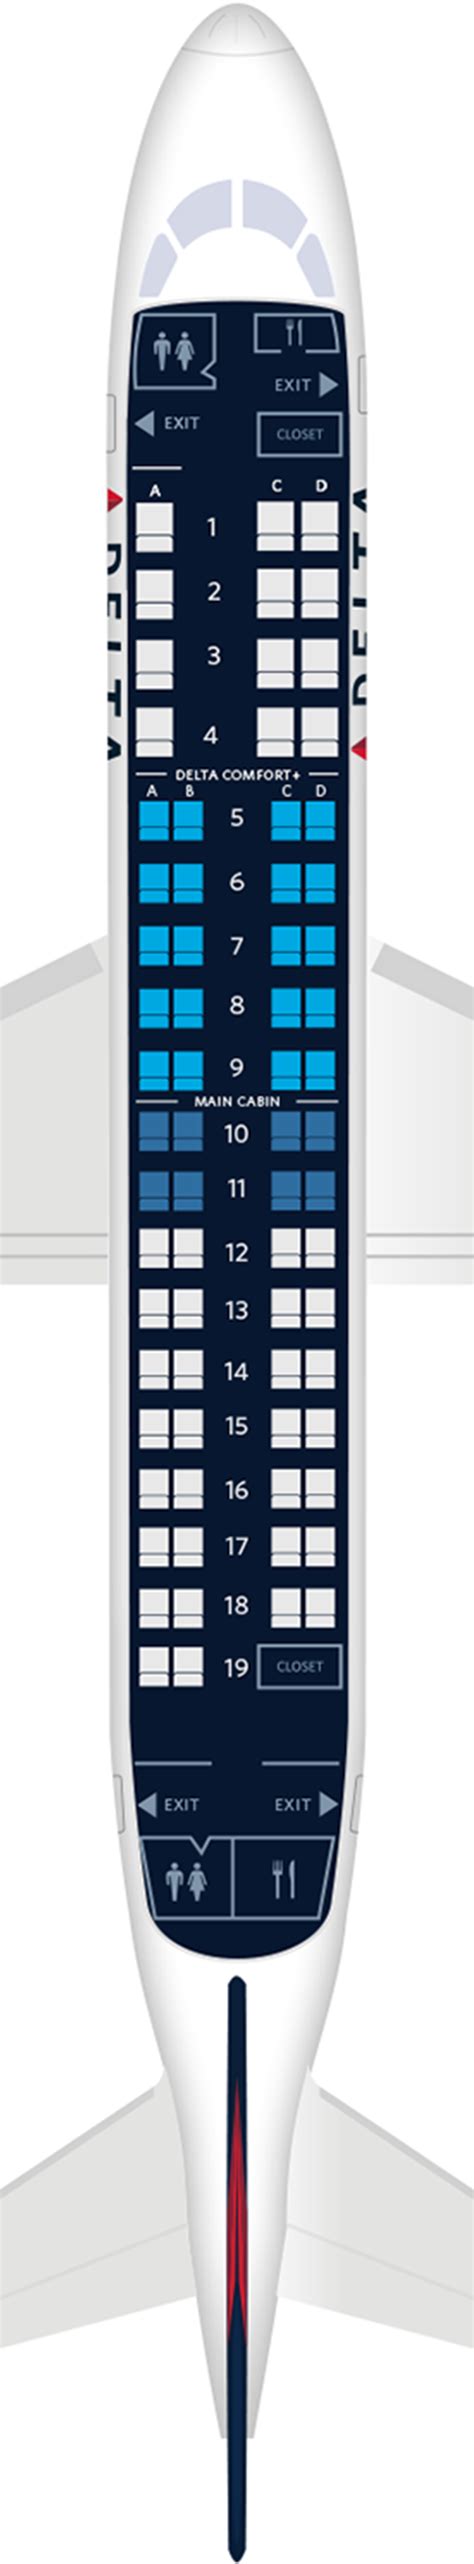 Embraer e 175 seating chart. American Airlines Embraer 175 jets feature a total of 76 seats available in three different classes including First, Main Cabin Extra, and Main Cabin. There are 12 seats in the First Class cabin with a 1-2 configuration and 20 seats in the Main Cabin Extra with a 2-2 configuration. The remaining 44 seats are located in the Main Cabin Class ... 